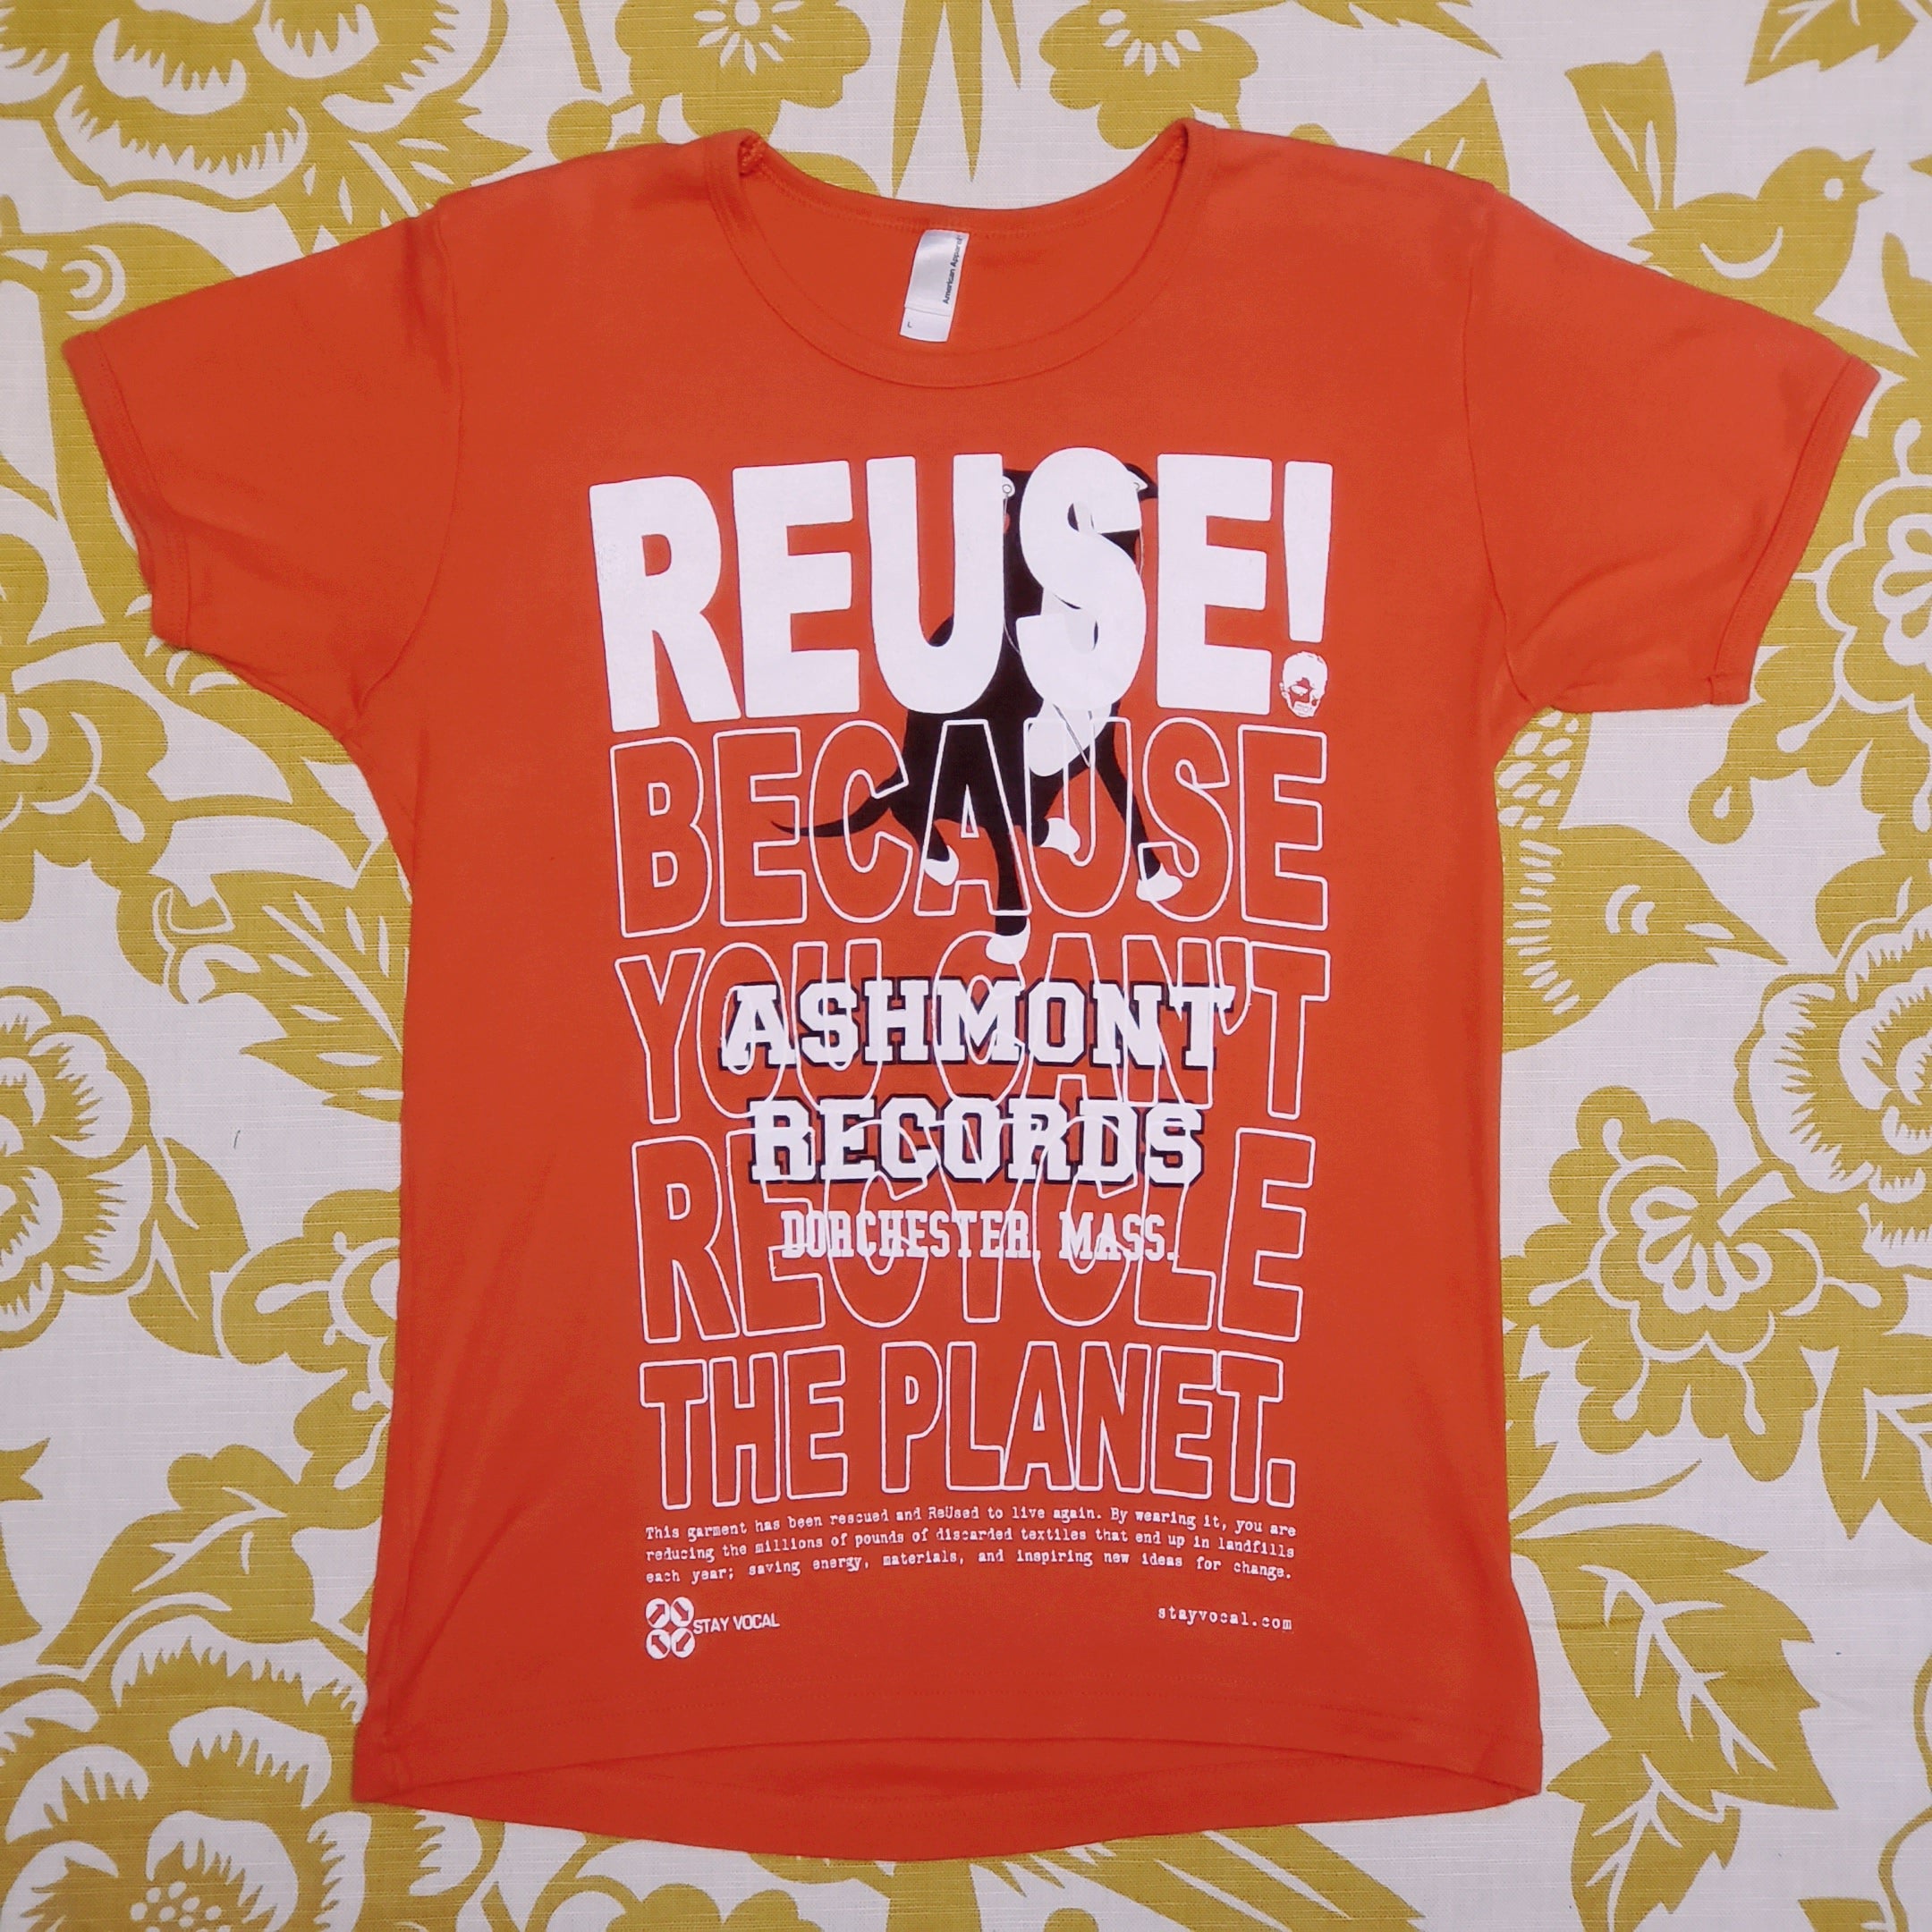 One of a Kind (Women's L) REUSE! Ashmont Records Dorchester, MA T-Shirt